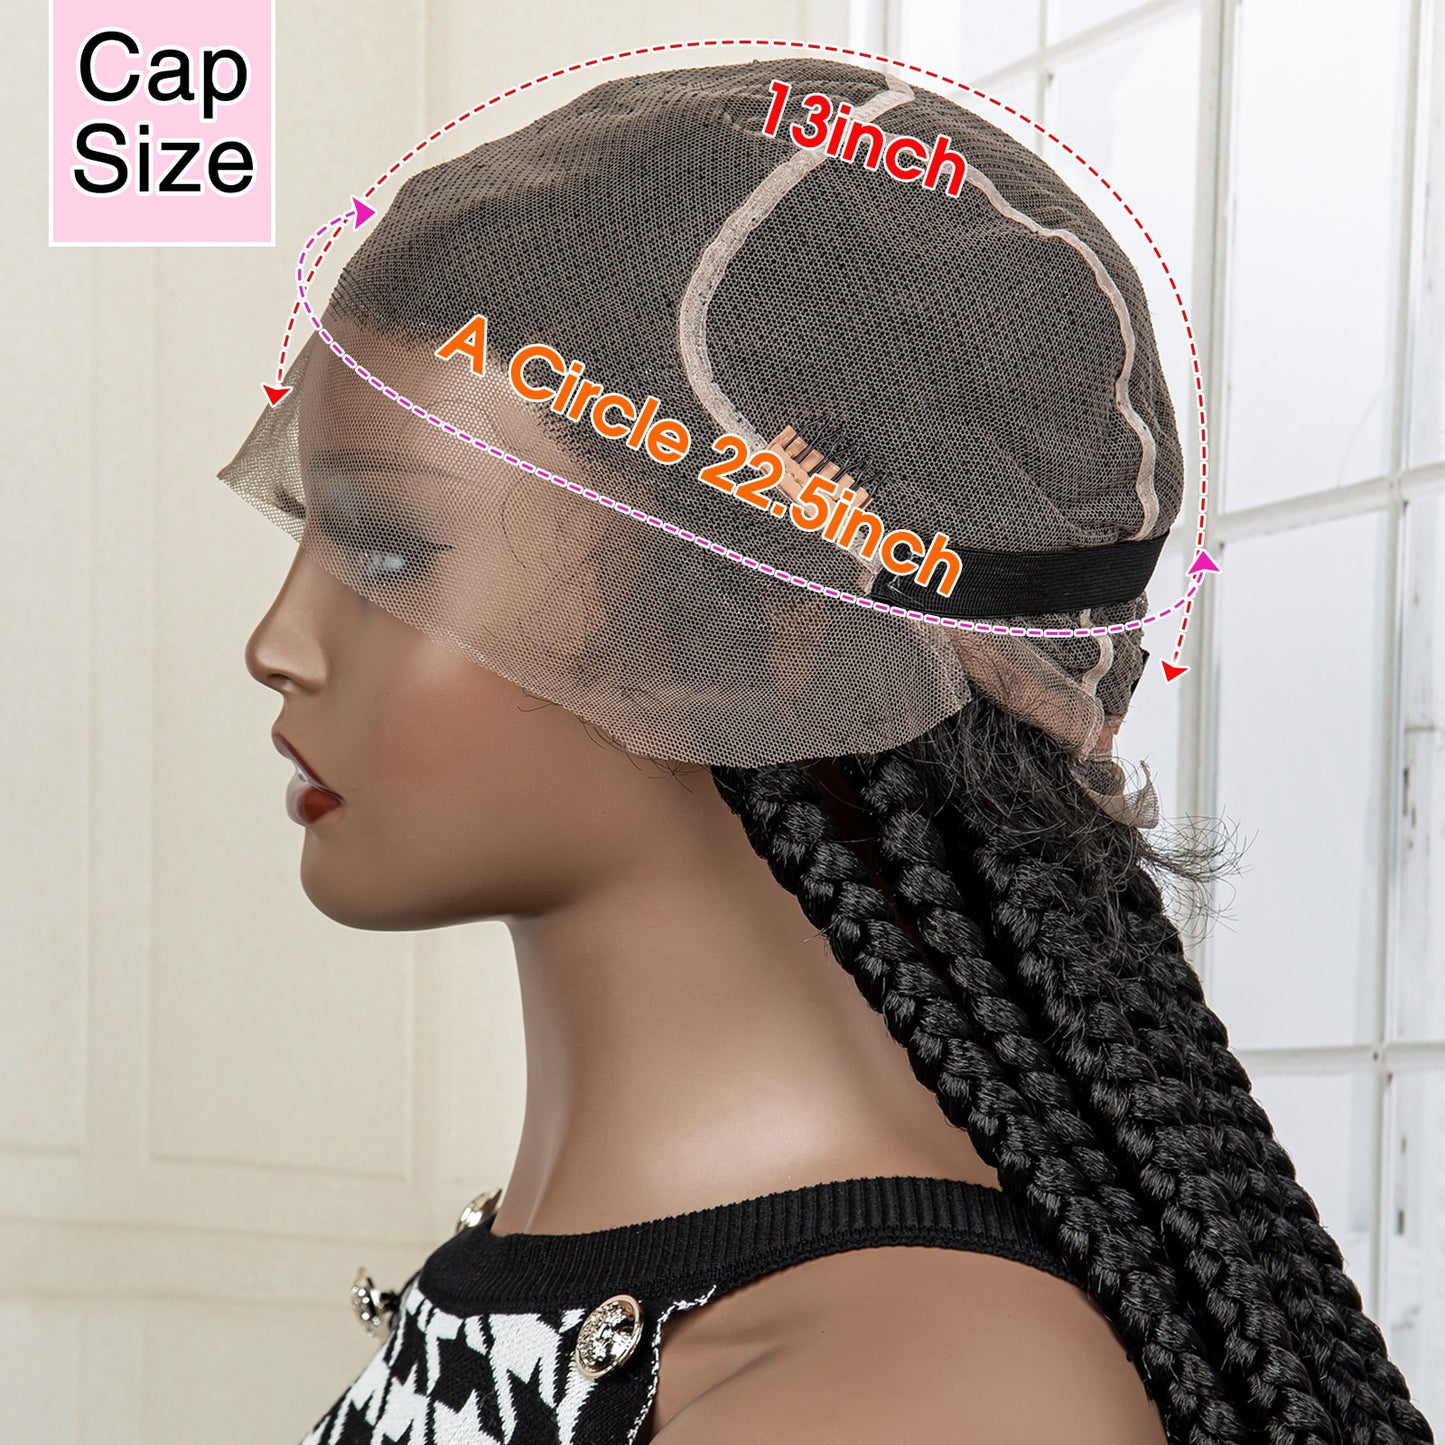 no need to spend hours to braid your hair Full Lace Cornrow Braids Synthetic Lace Front Wig Big Square Knotless Box Braids Wig with Baby Hair Braided Wigs for Black Women